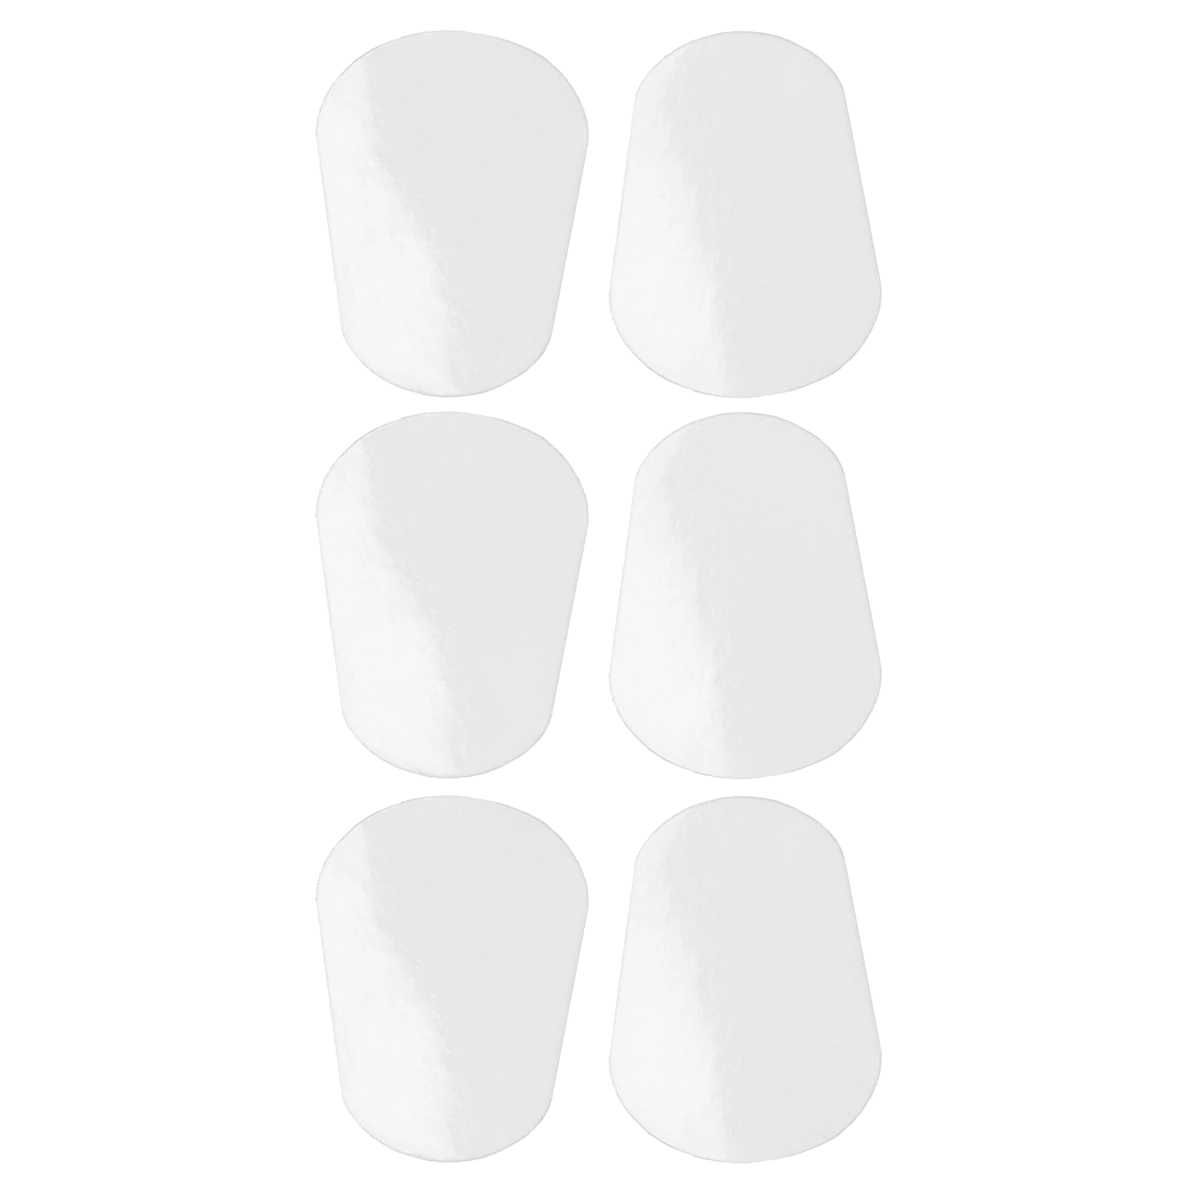 PROTEC Mouthpiece Cushion, 0.4mm, 6pc, Clear